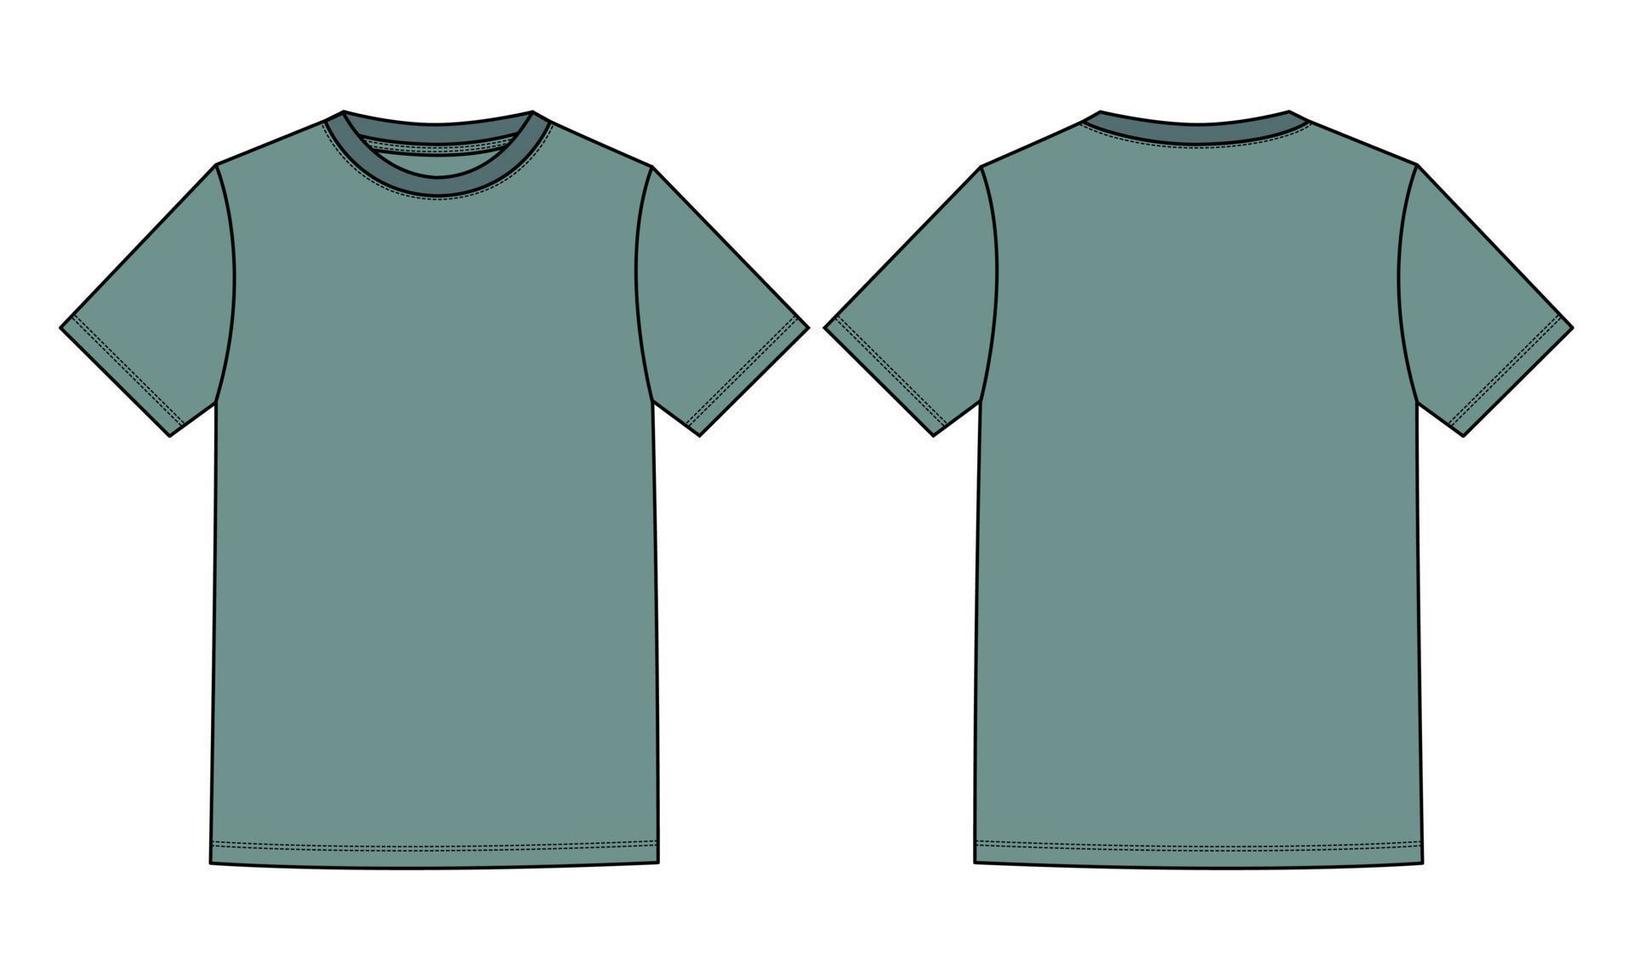 Short Sleeve Basic T shirt Technical Fashion Flat Sketch Vector Illustration Light Green Color Template Front and Back Views Isolated On white Background.